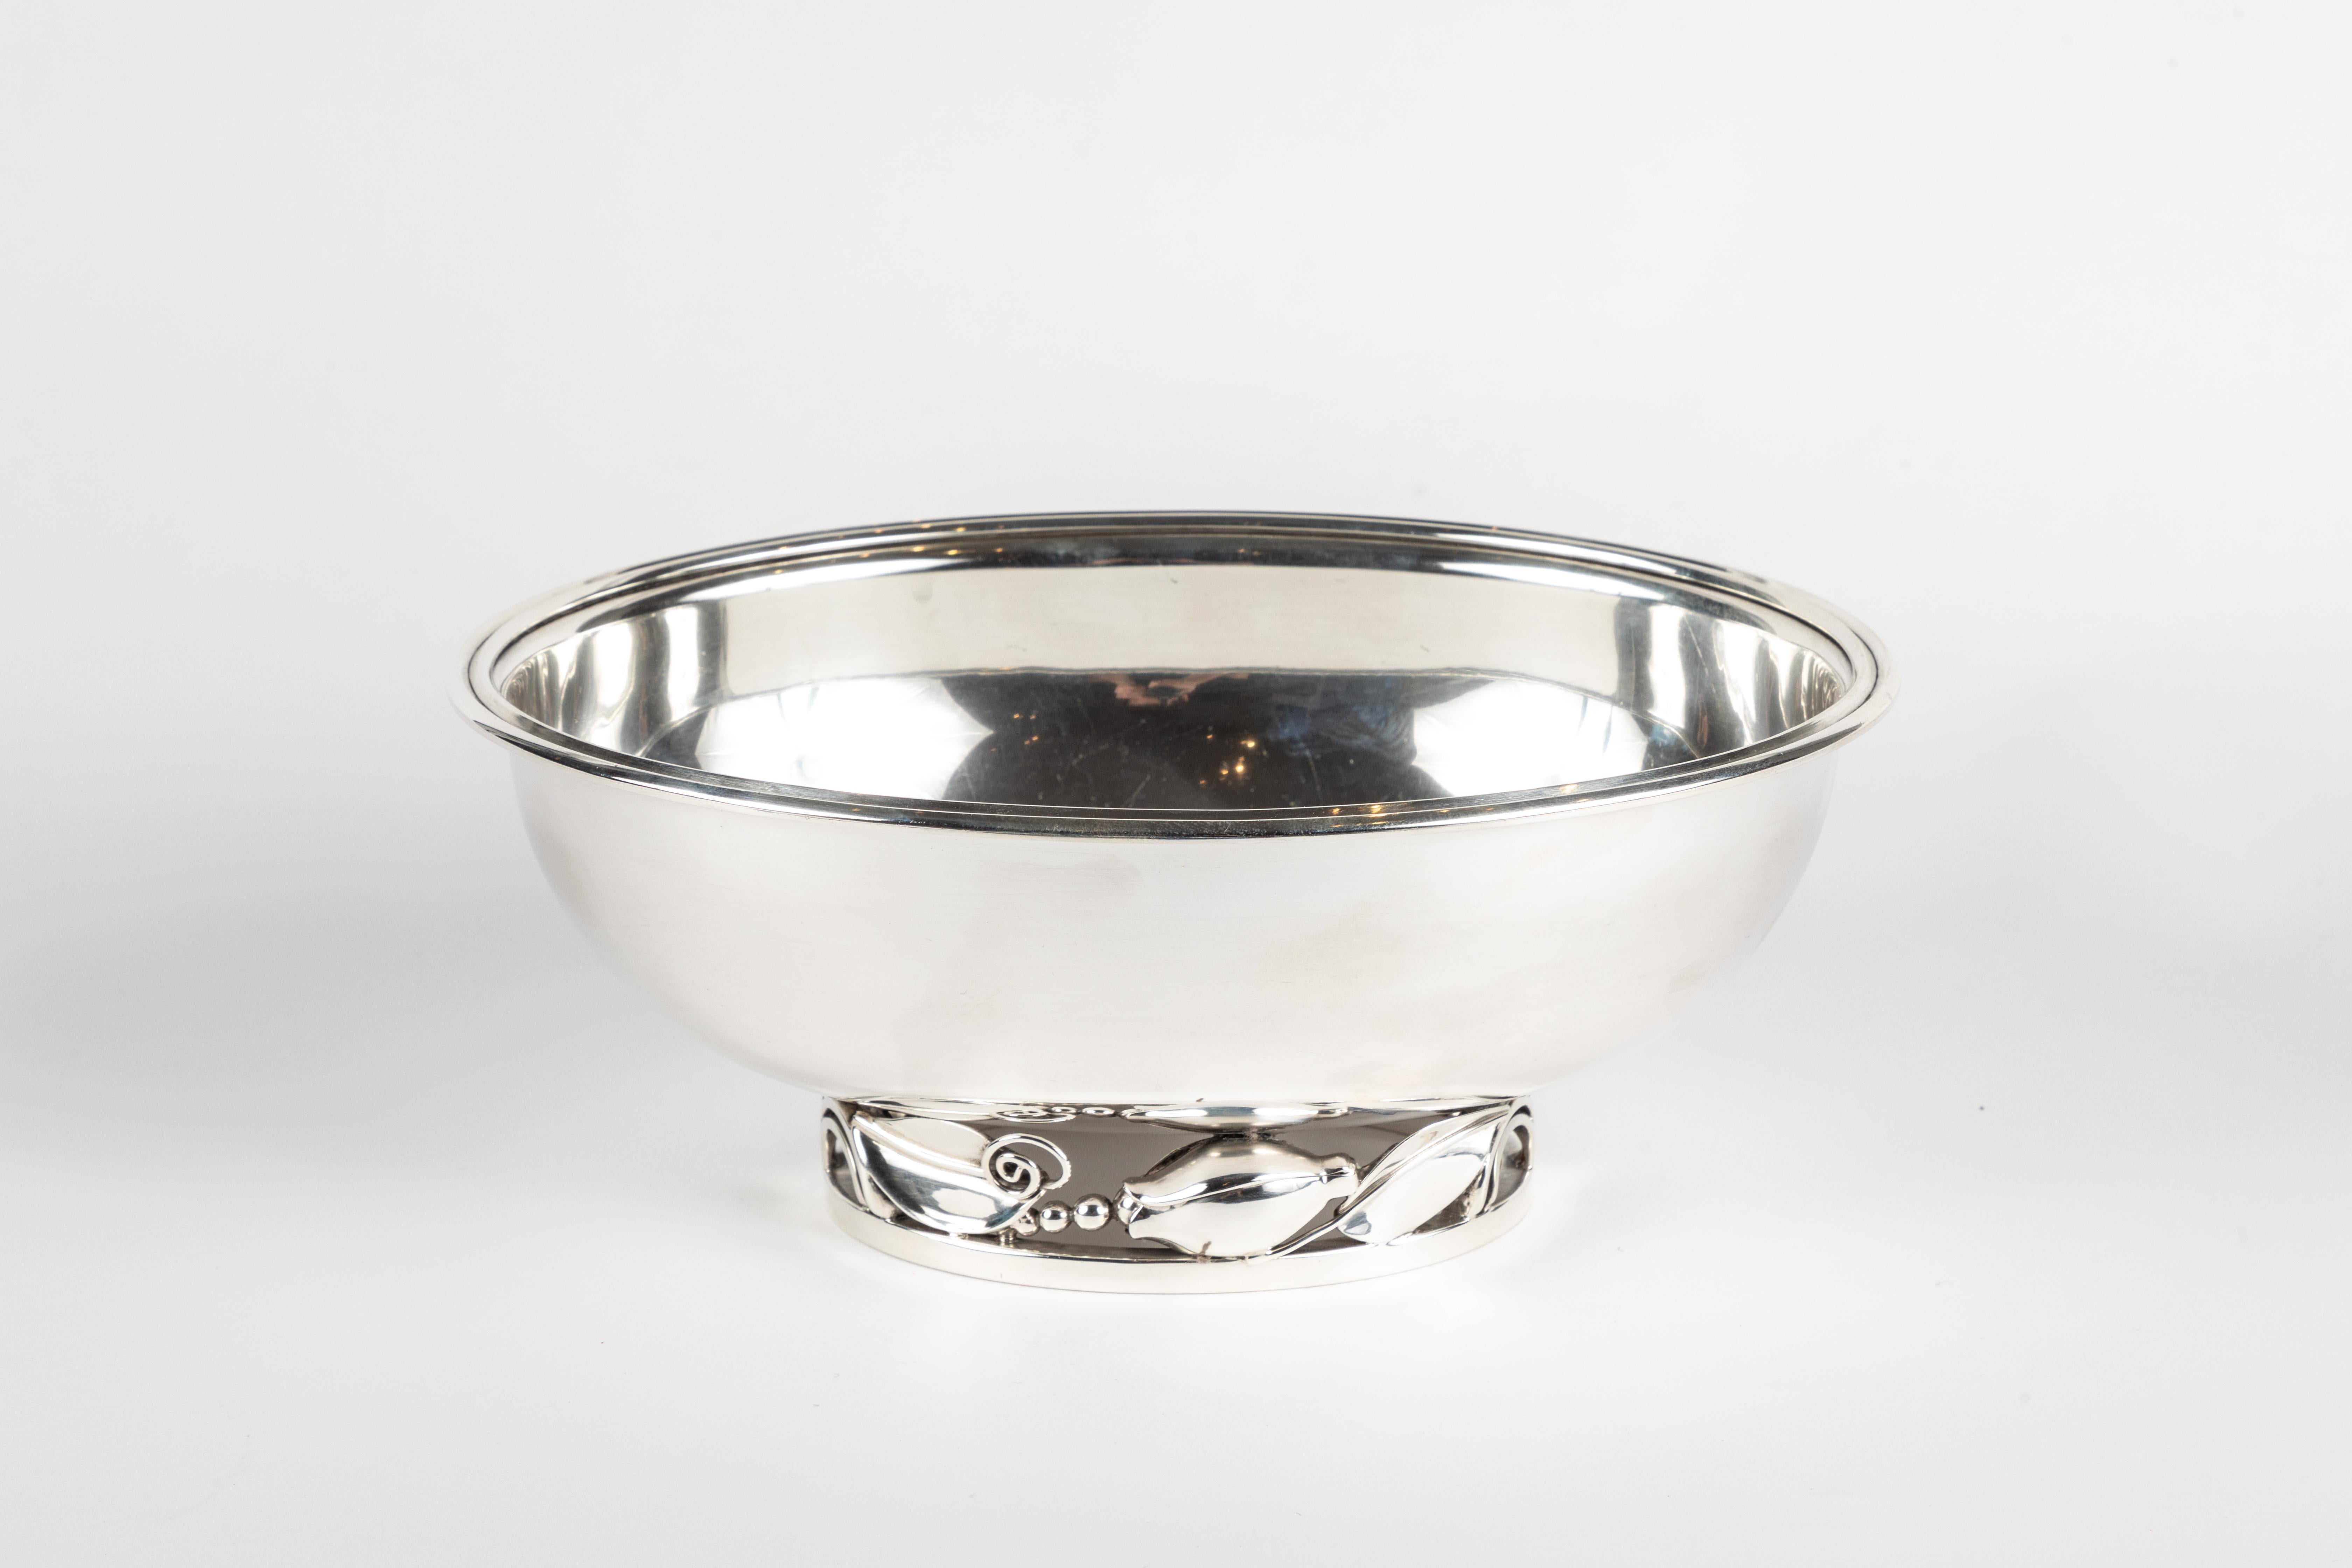 Very heavy sterling silver footed oval bowl designed by Alphonse LaPaglia for International Silver. This substantial bowl rests on an articulated foot comprised of scrolling blossoms and beads. Signed on the underside INTERNATIONAL STERLING LA